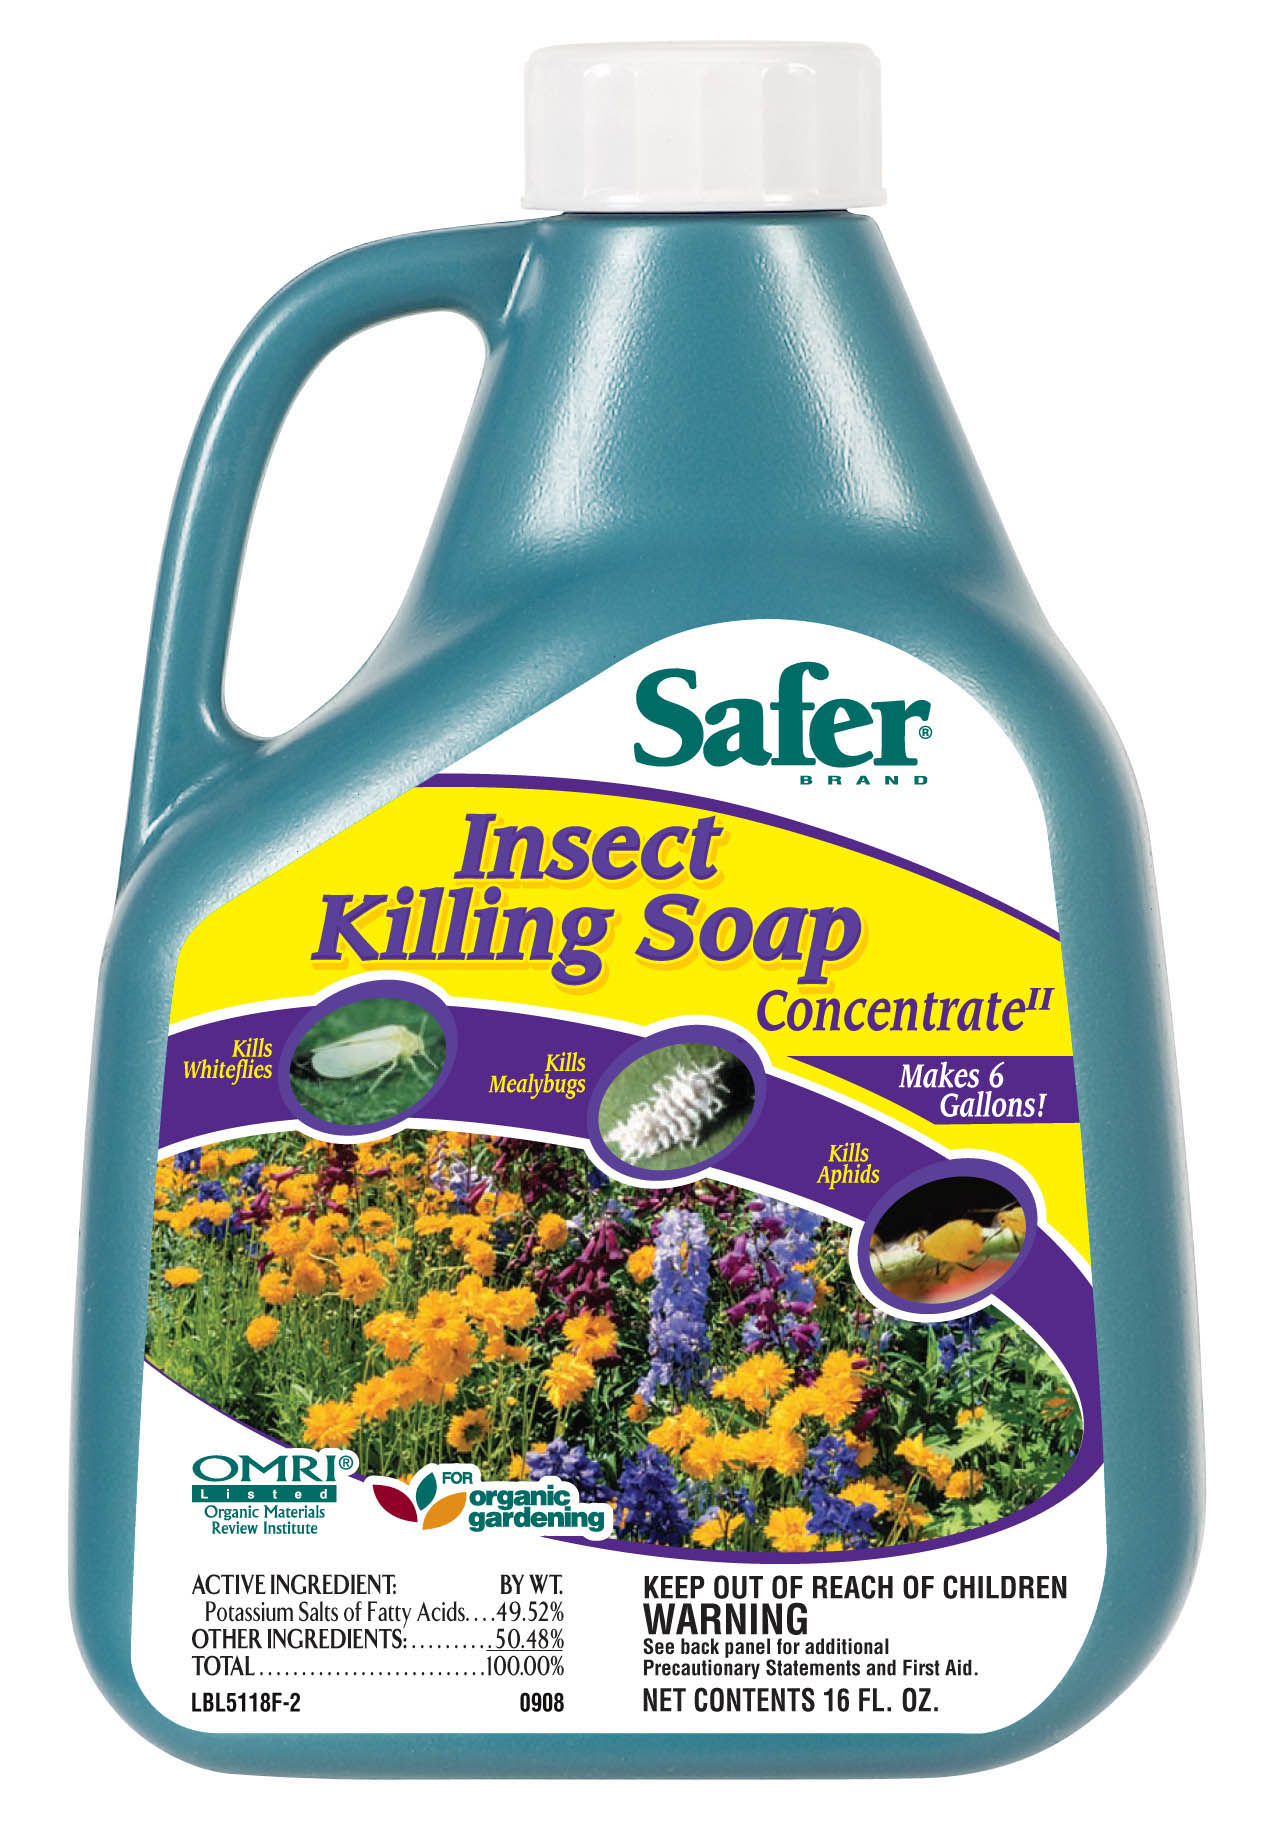 Picture for Safer Insect Killing Soap Concentrate, 16 oz